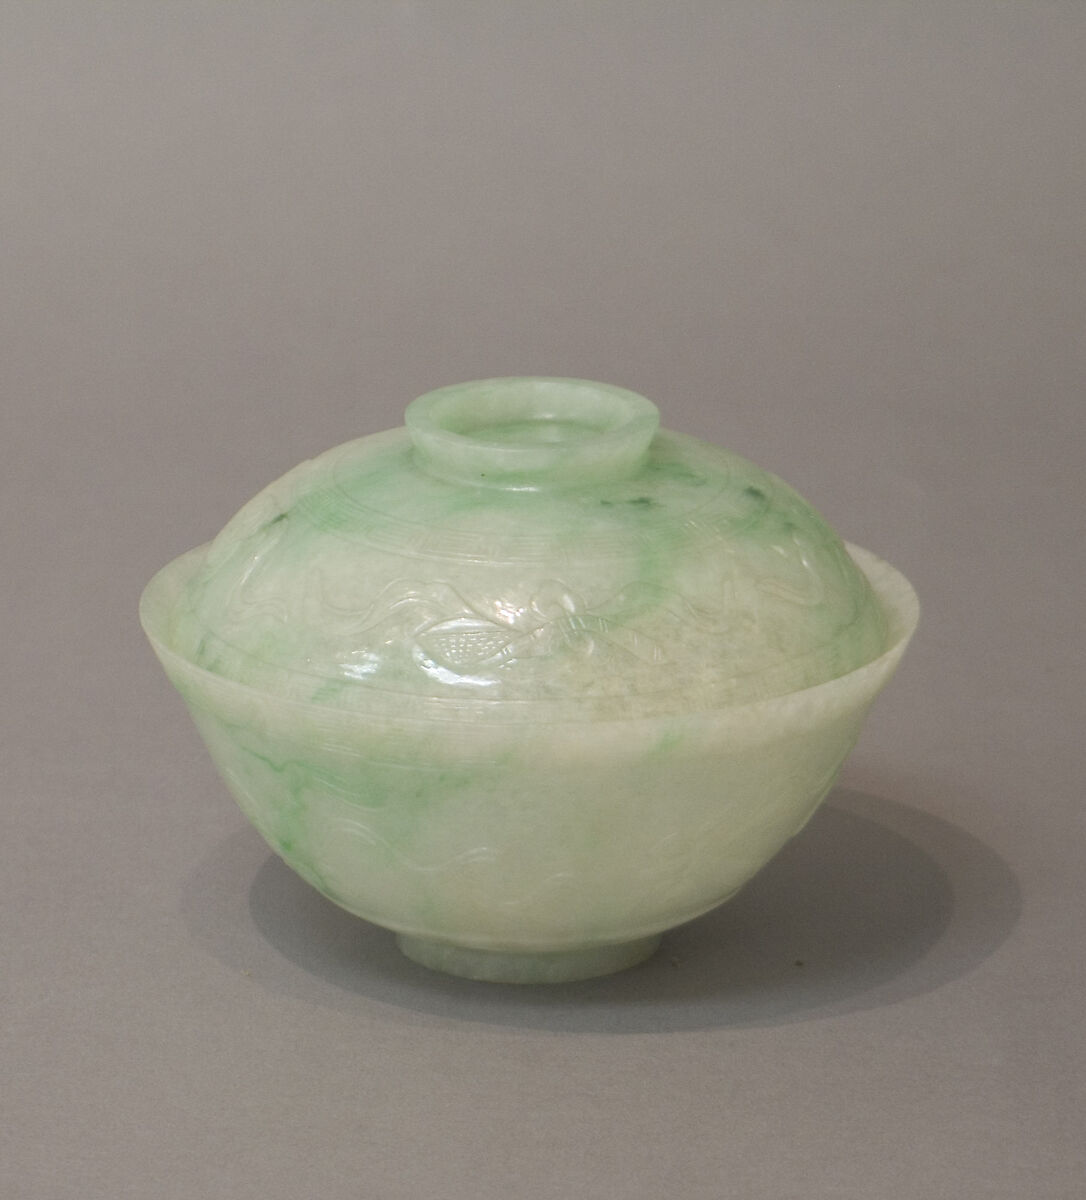 Cup with cover, Jadeite, white with veins and cloudings of emerald-green, China 